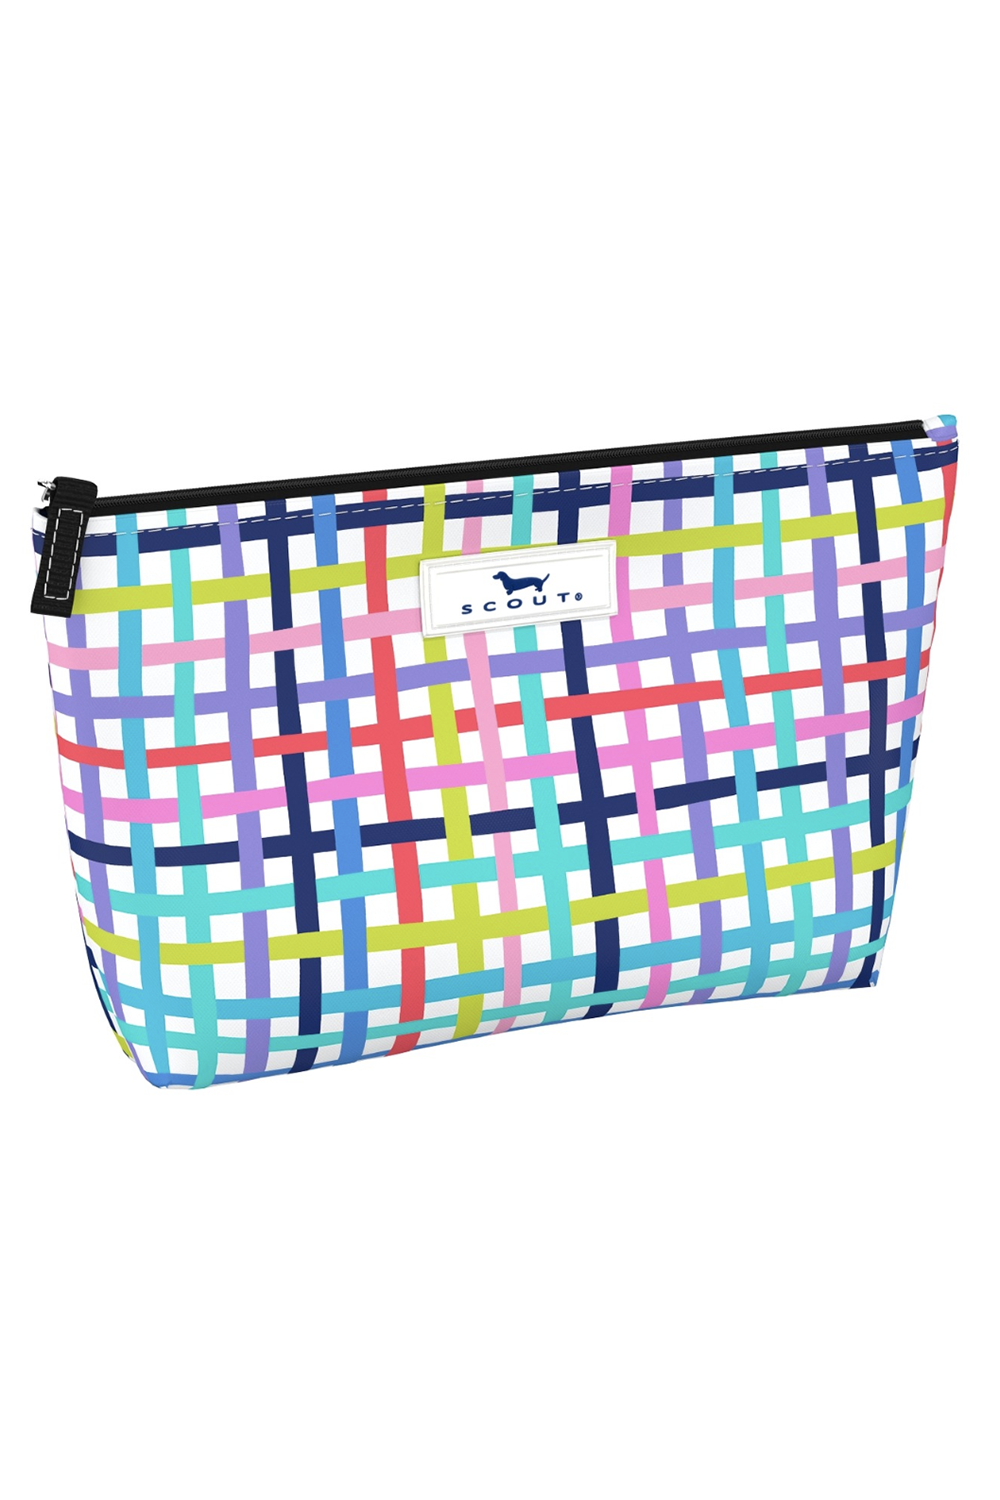 Twiggy Cosmetic Bag - "Off the Grid" SUM24